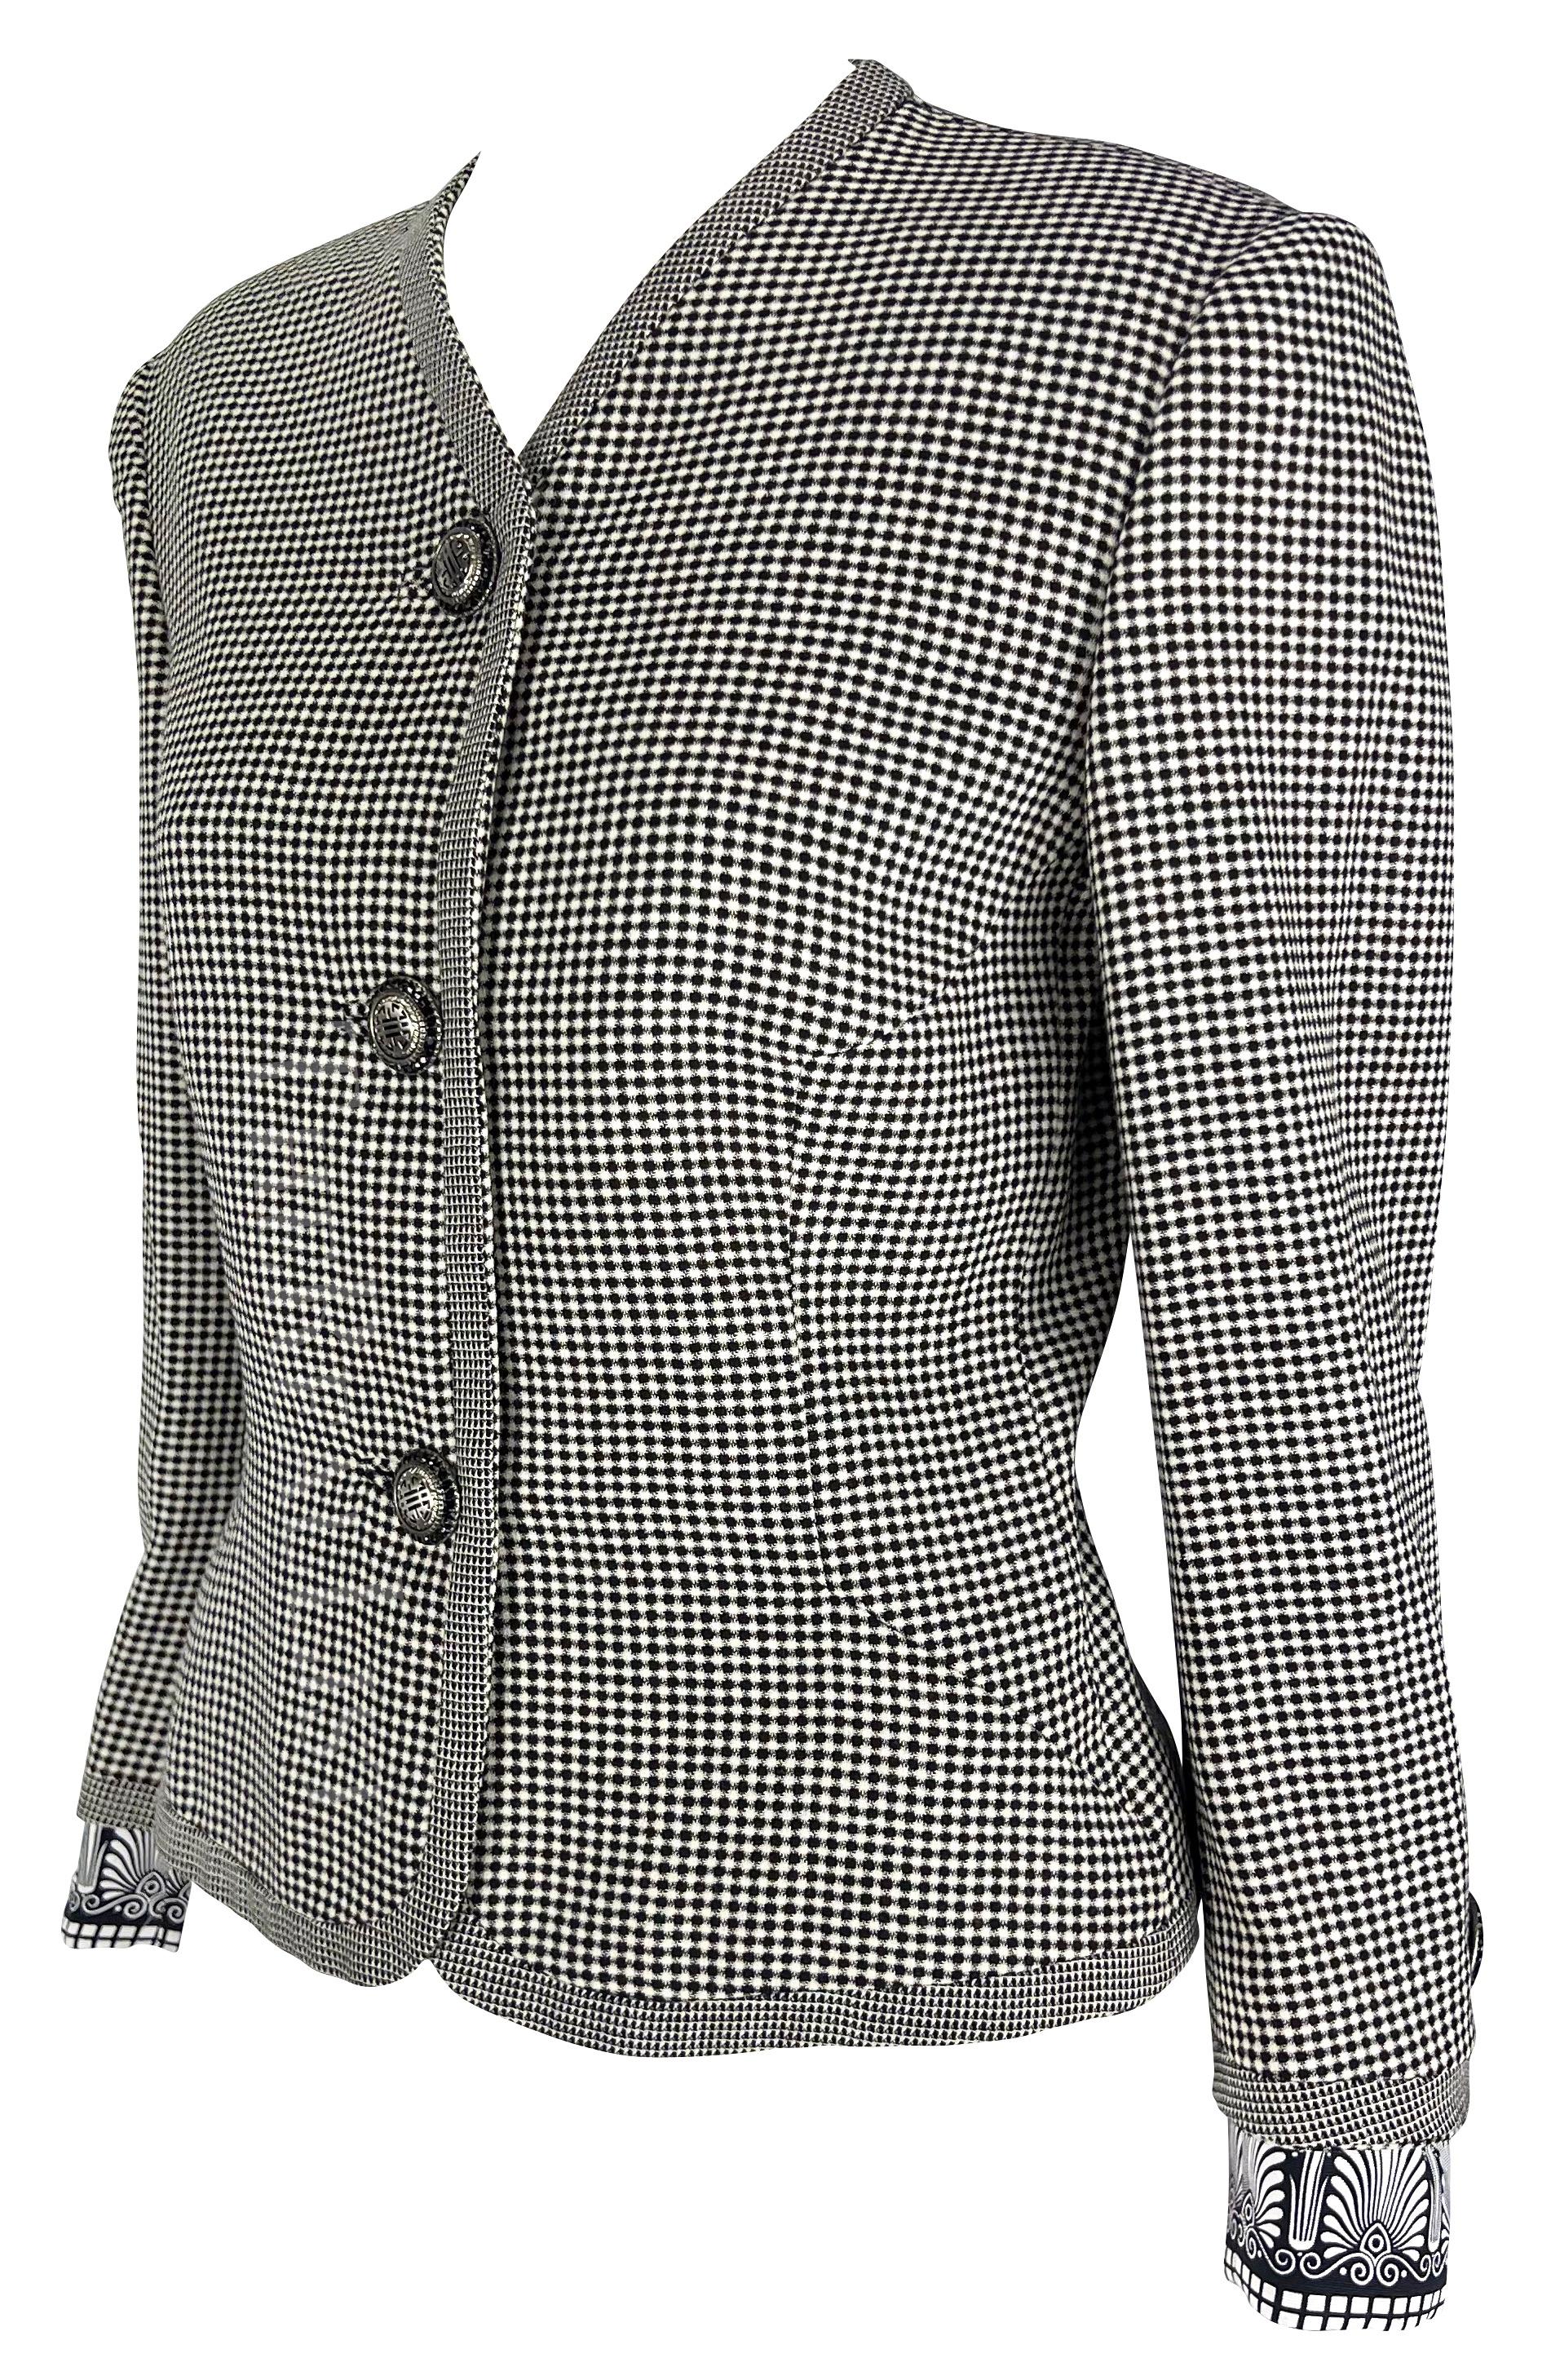 Presenting a chic black and white Gianni Versace checkered jacket, designed by Gianni Versace. From the Spring/Summer 1992 collection, this collarless jacket captures the essence of timeless style. The silver-tone Versace Medusa relief buttons add a